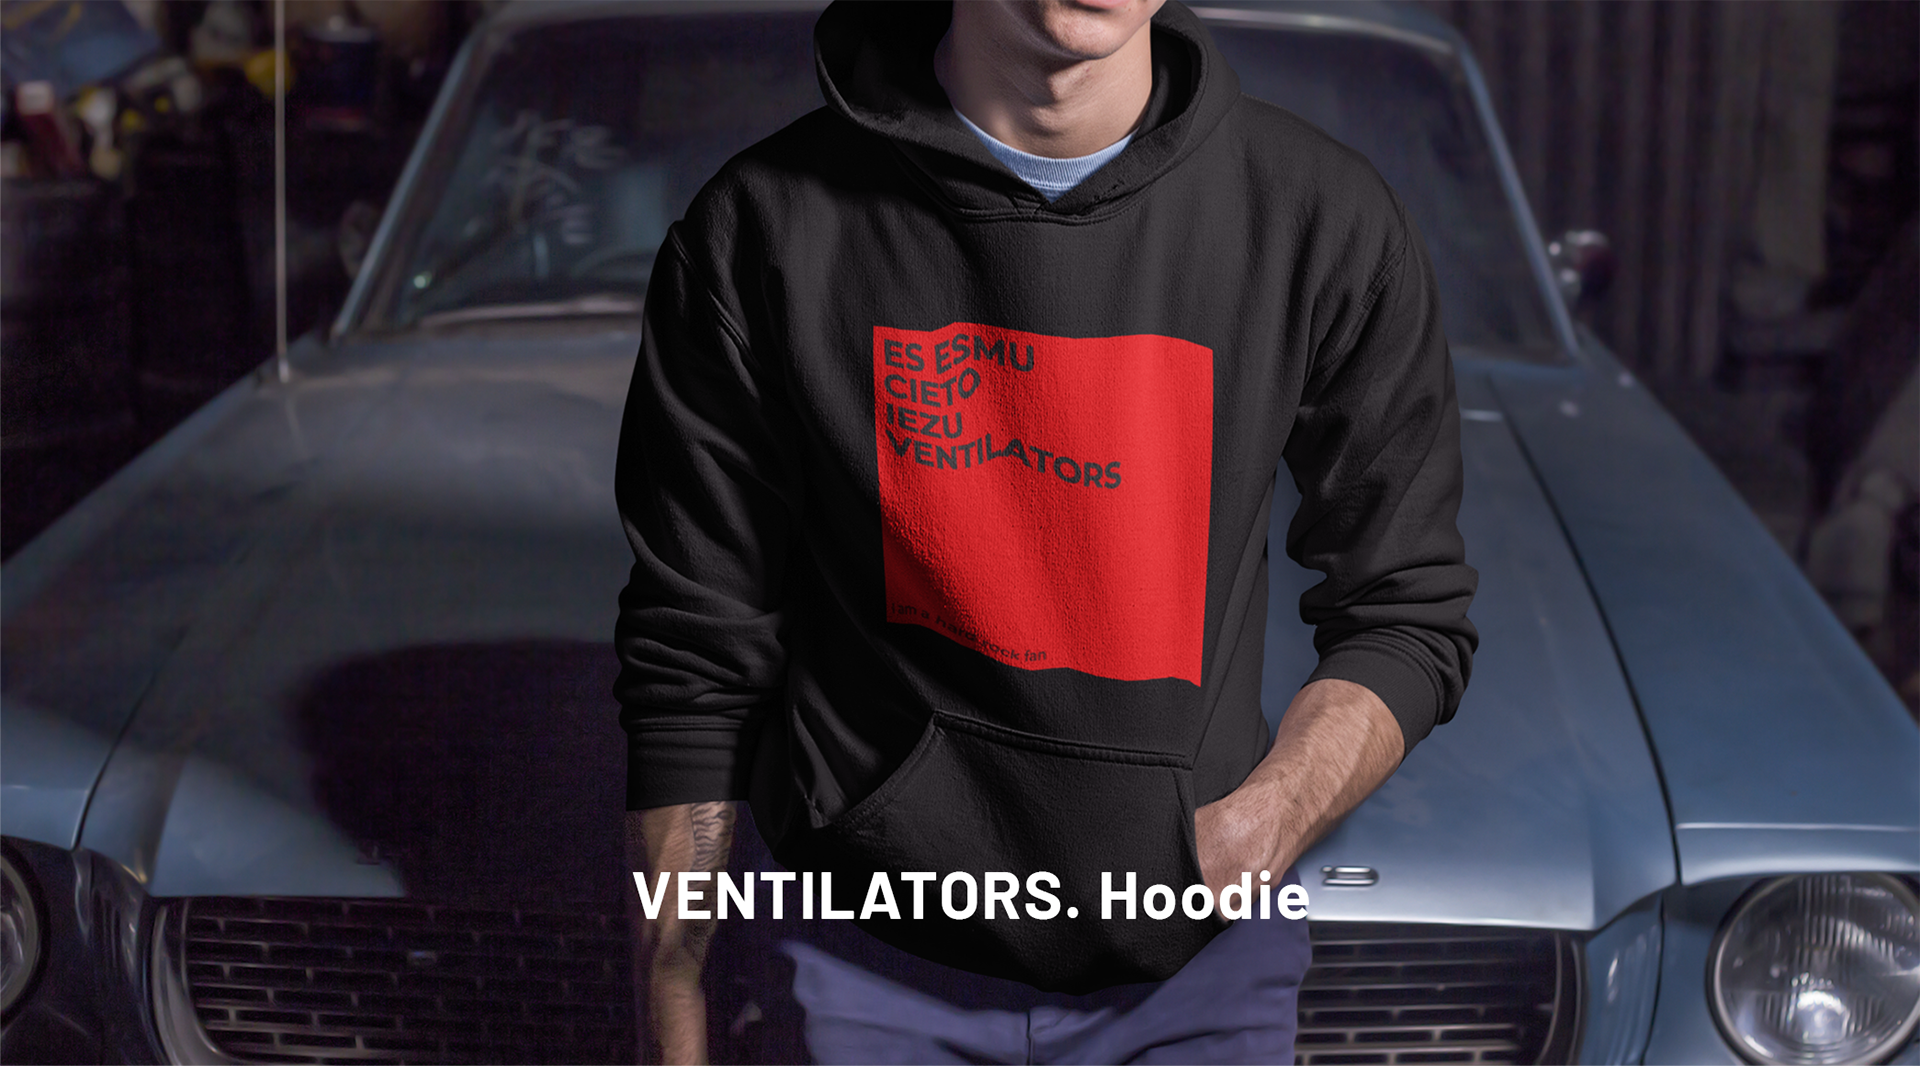 VENTILATORS Unisex Hoodie  With a large front pouch pocket and drawstrings in a matching color, this Unisex Heavy Blend Hoodie is a sure crowd-favorite. It’s soft, stylish, and perfect for cooler evenings. • 50% pre-shrunk cotton, 50% polyester • Air-jet spun yarn with a soft feel and reduced pilling • Double-lined hood with matching drawcord • Quarter-turned body to avoid crease down the middle • 1 × 1 athletic rib-knit cuffs and waistband with spandex • Front pouch pocket • Double-needle stitched collar, shoulders, armholes, cuffs, and hem